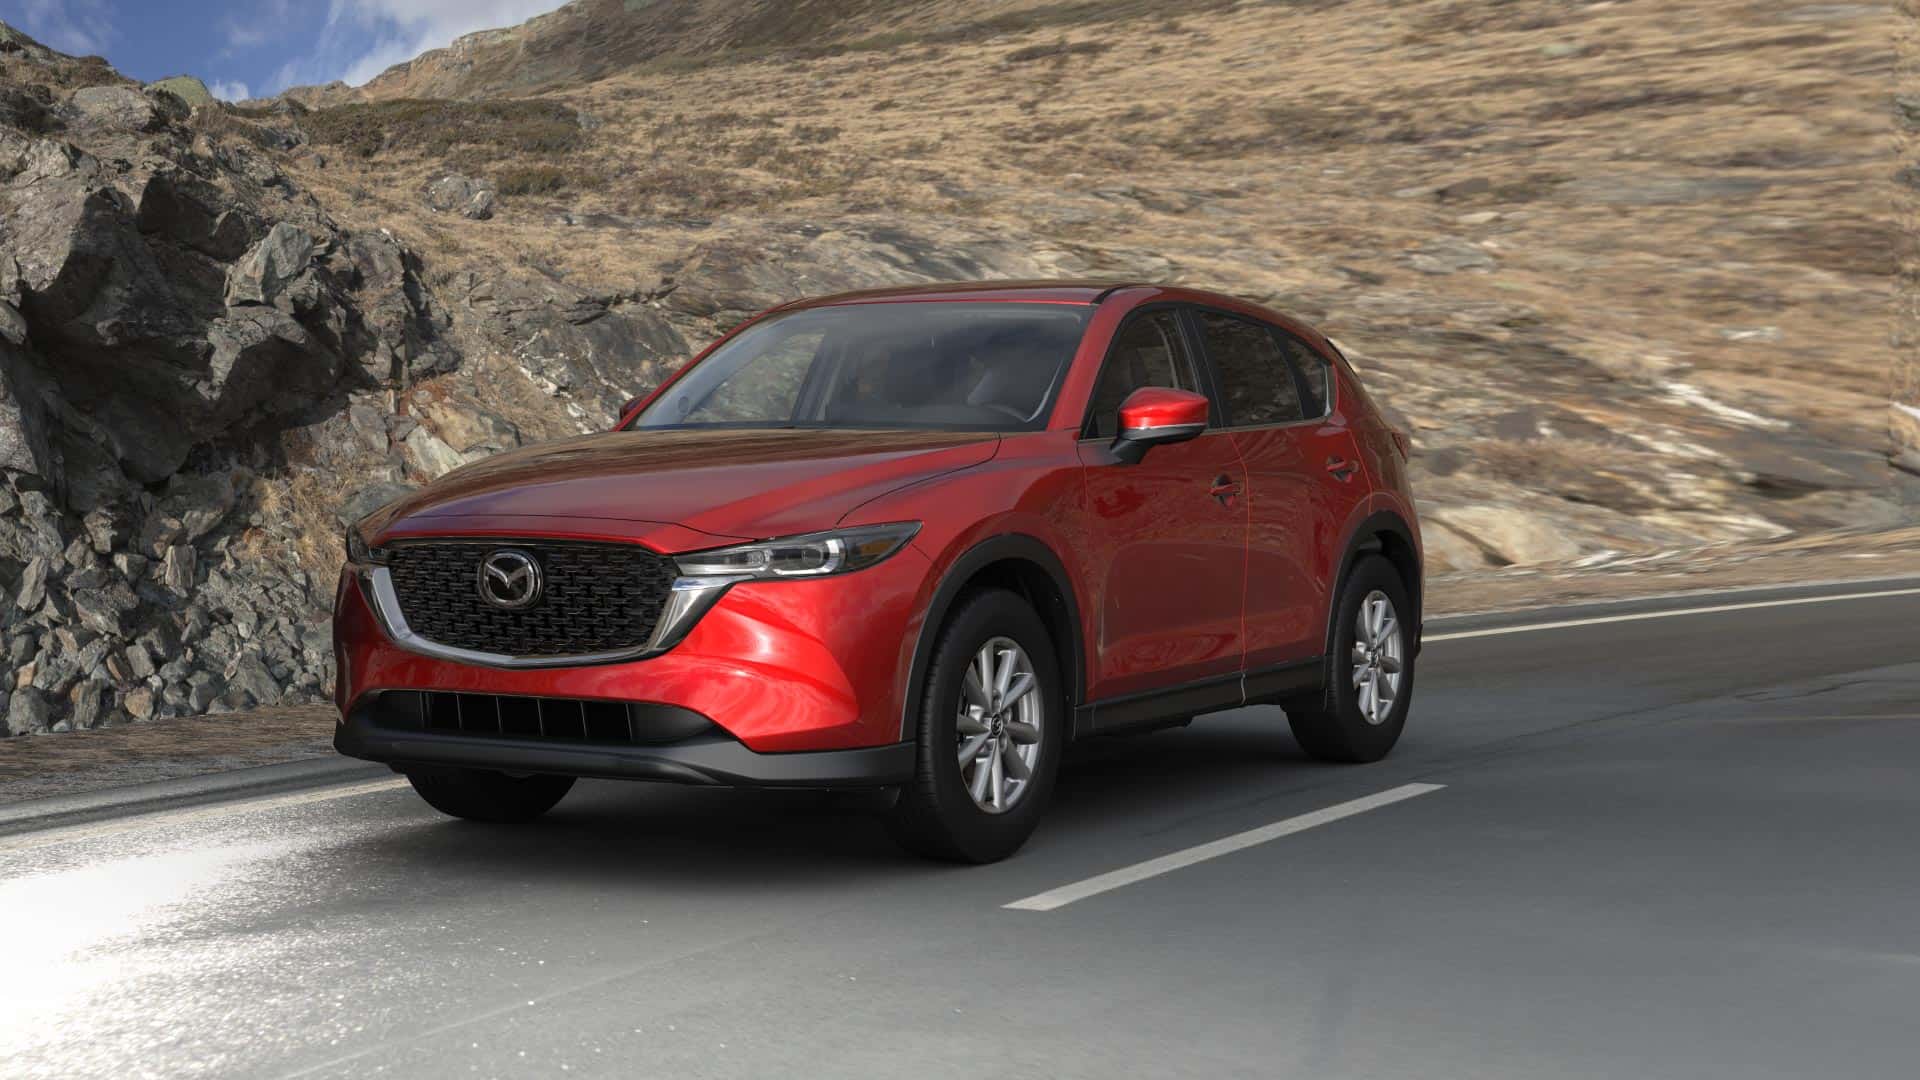 2023 Mazda CX-5 2.5 S Select Soul Red Crystal Metallic | Bommarito Mazda St. Peters in St. Peters MO